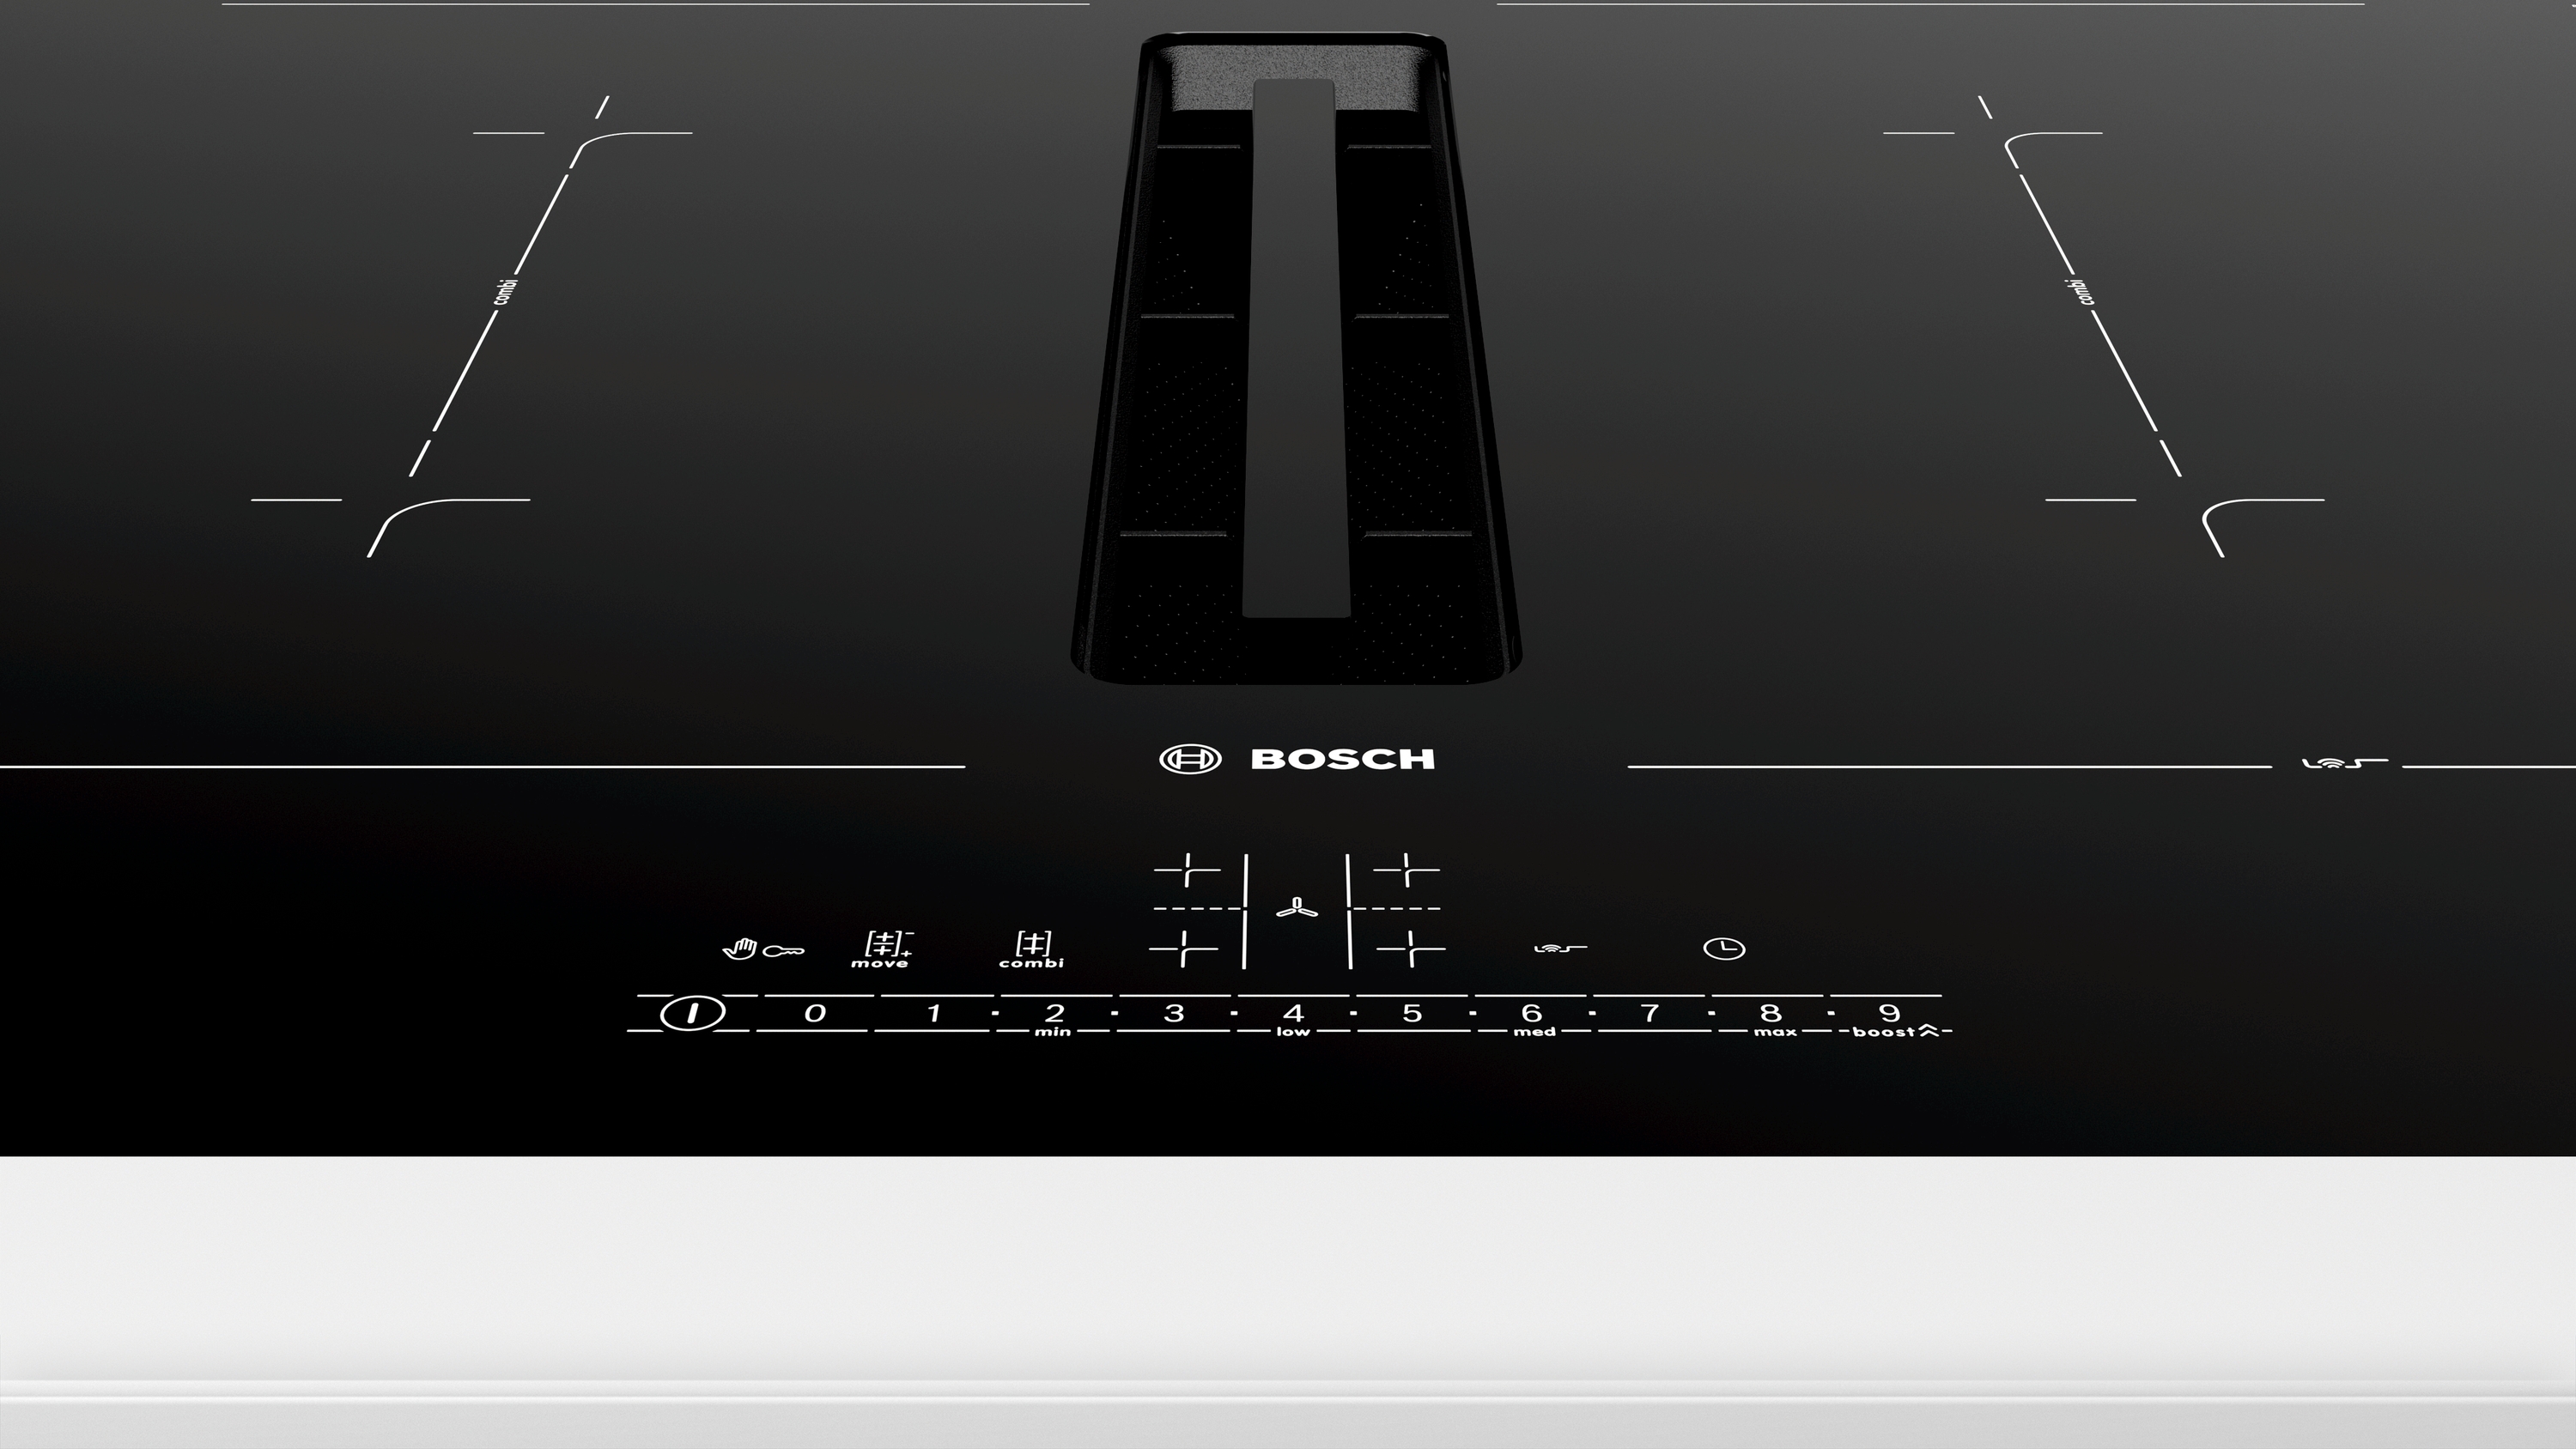 Series 6, Induction hob with integrated ventilation system, 70 cm, flush mount, PVQ721F25E